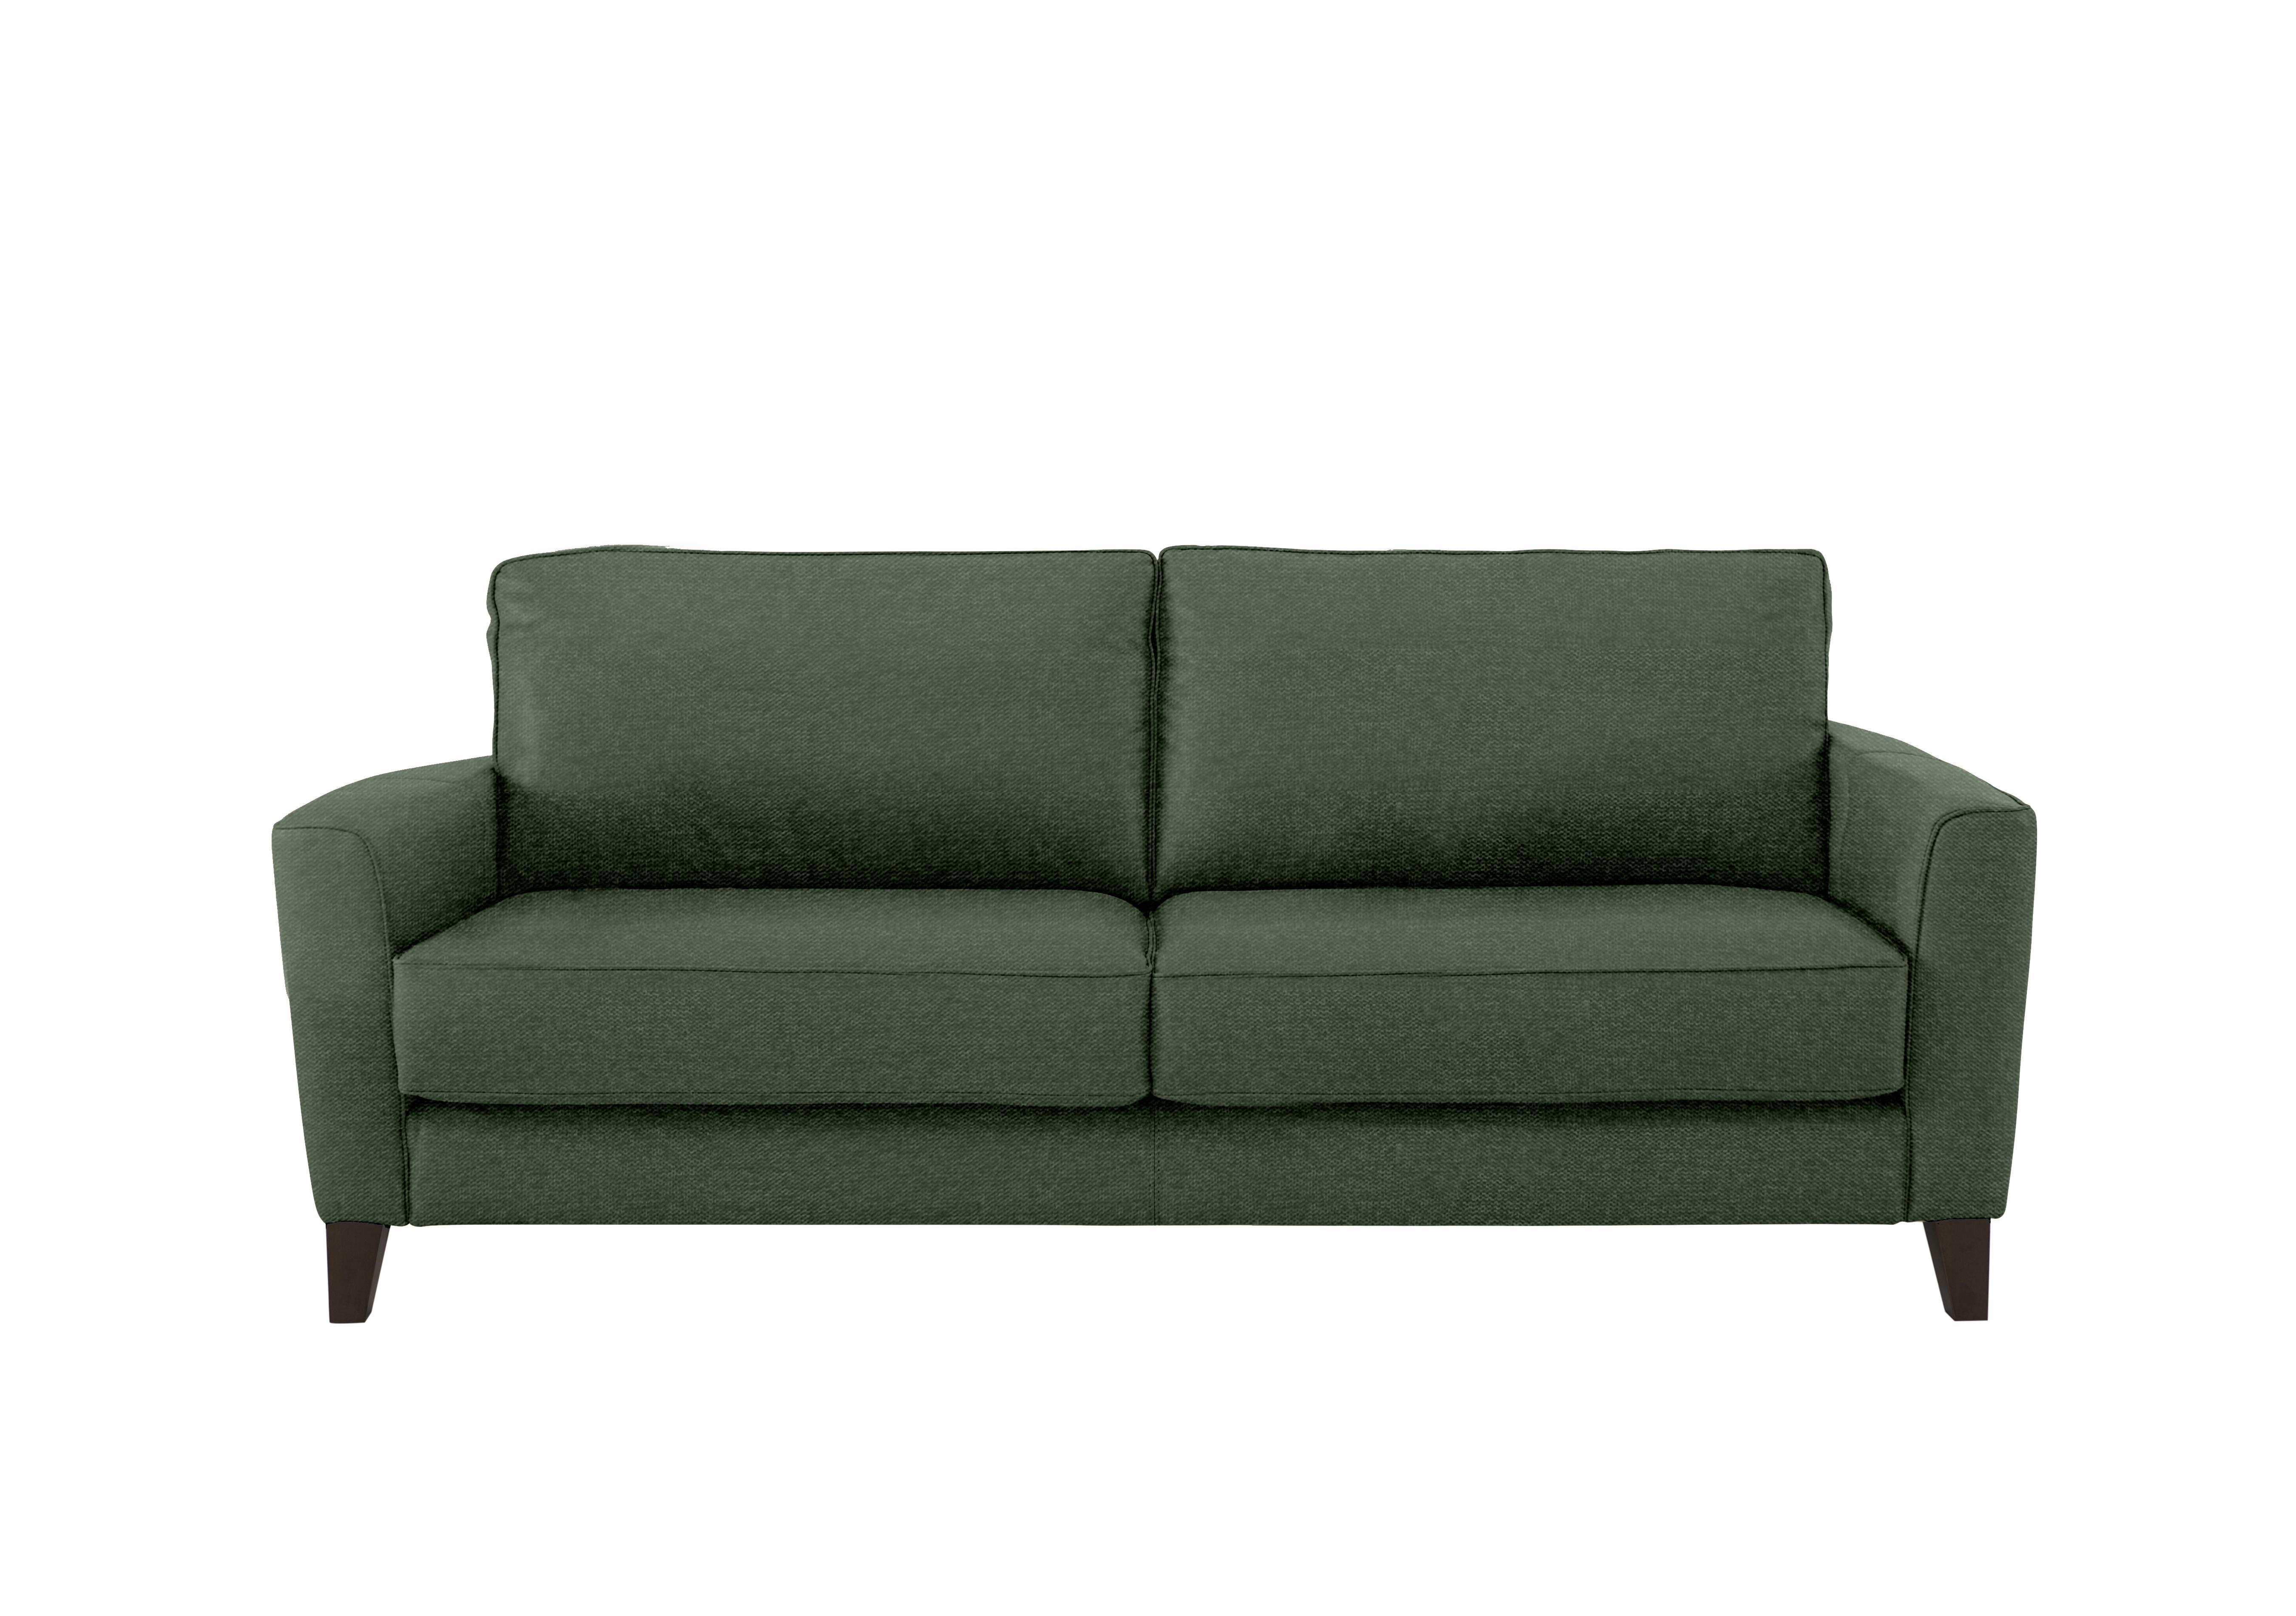 Brondby 3 Seater Fabric Sofa in Fab-Ska-R48 Moss Green on Furniture Village